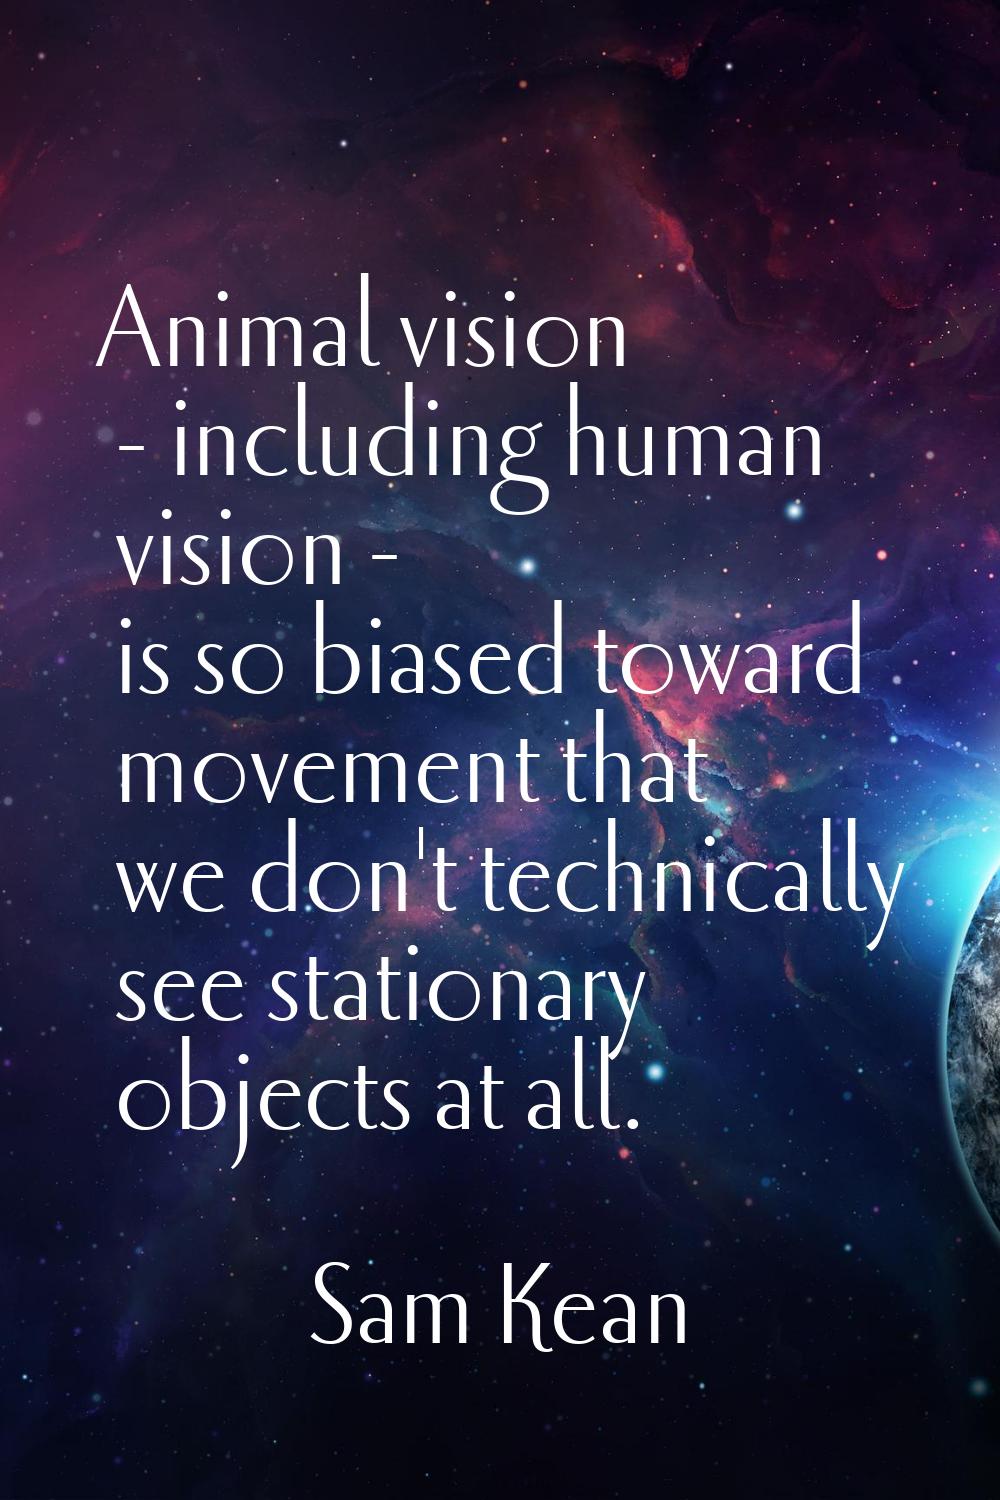 Animal vision - including human vision - is so biased toward movement that we don't technically see